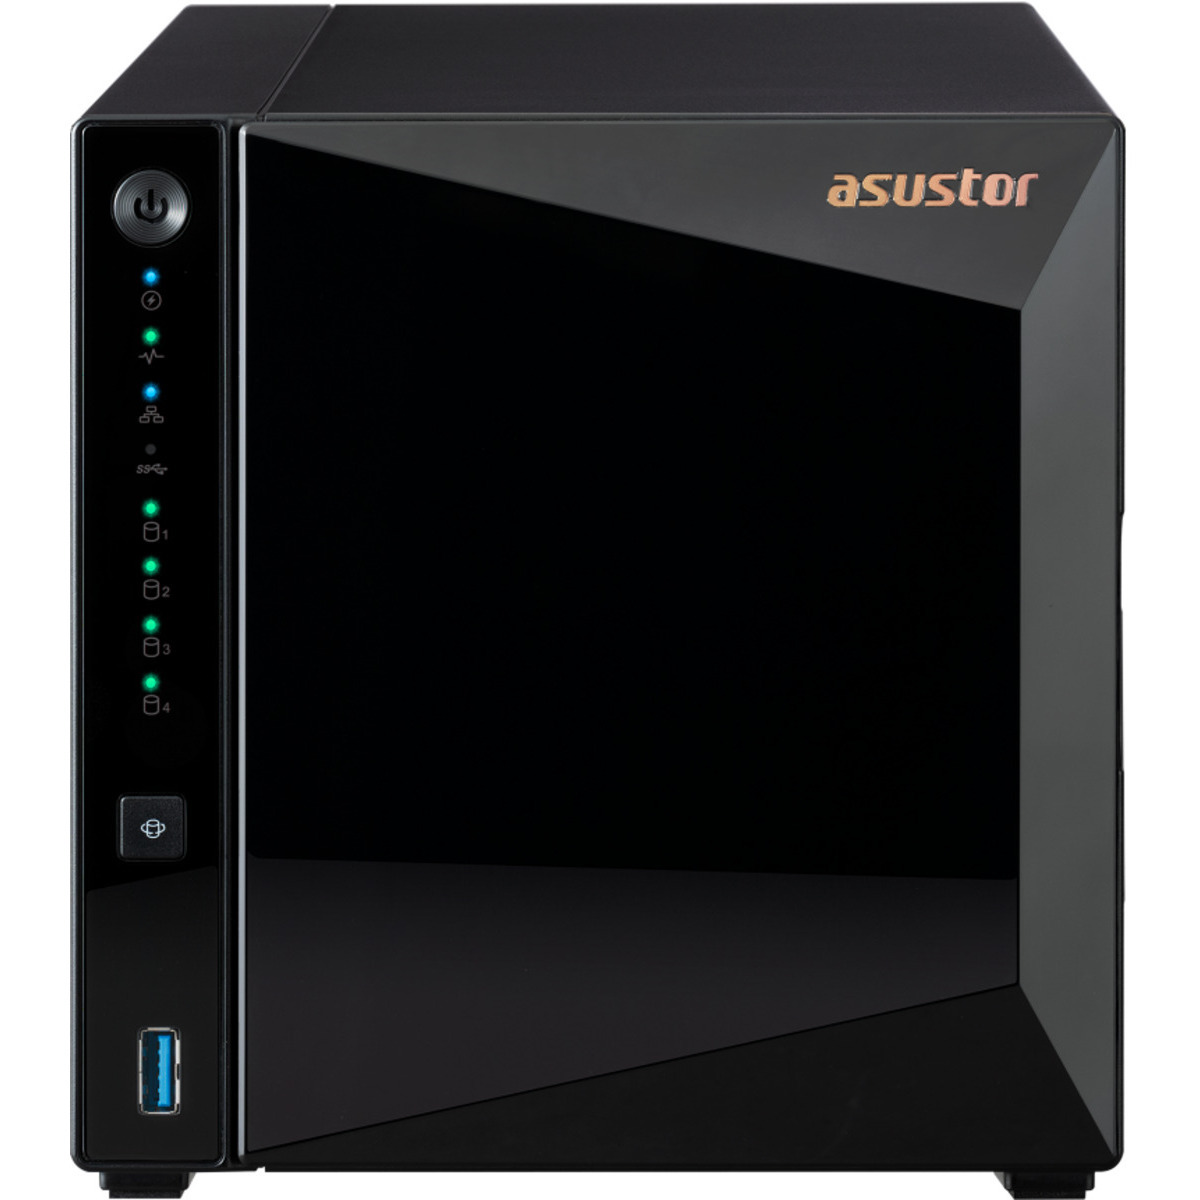 ASUSTOR DRIVESTOR 4 Pro AS3304T 40tb 4-Bay Desktop Personal / Basic Home / Small Office NAS - Network Attached Storage Device 4x10tb Western Digital Red Pro WD102KFBX 3.5 7200rpm SATA 6Gb/s HDD NAS Class Drives Installed - Burn-In Tested DRIVESTOR 4 Pro AS3304T